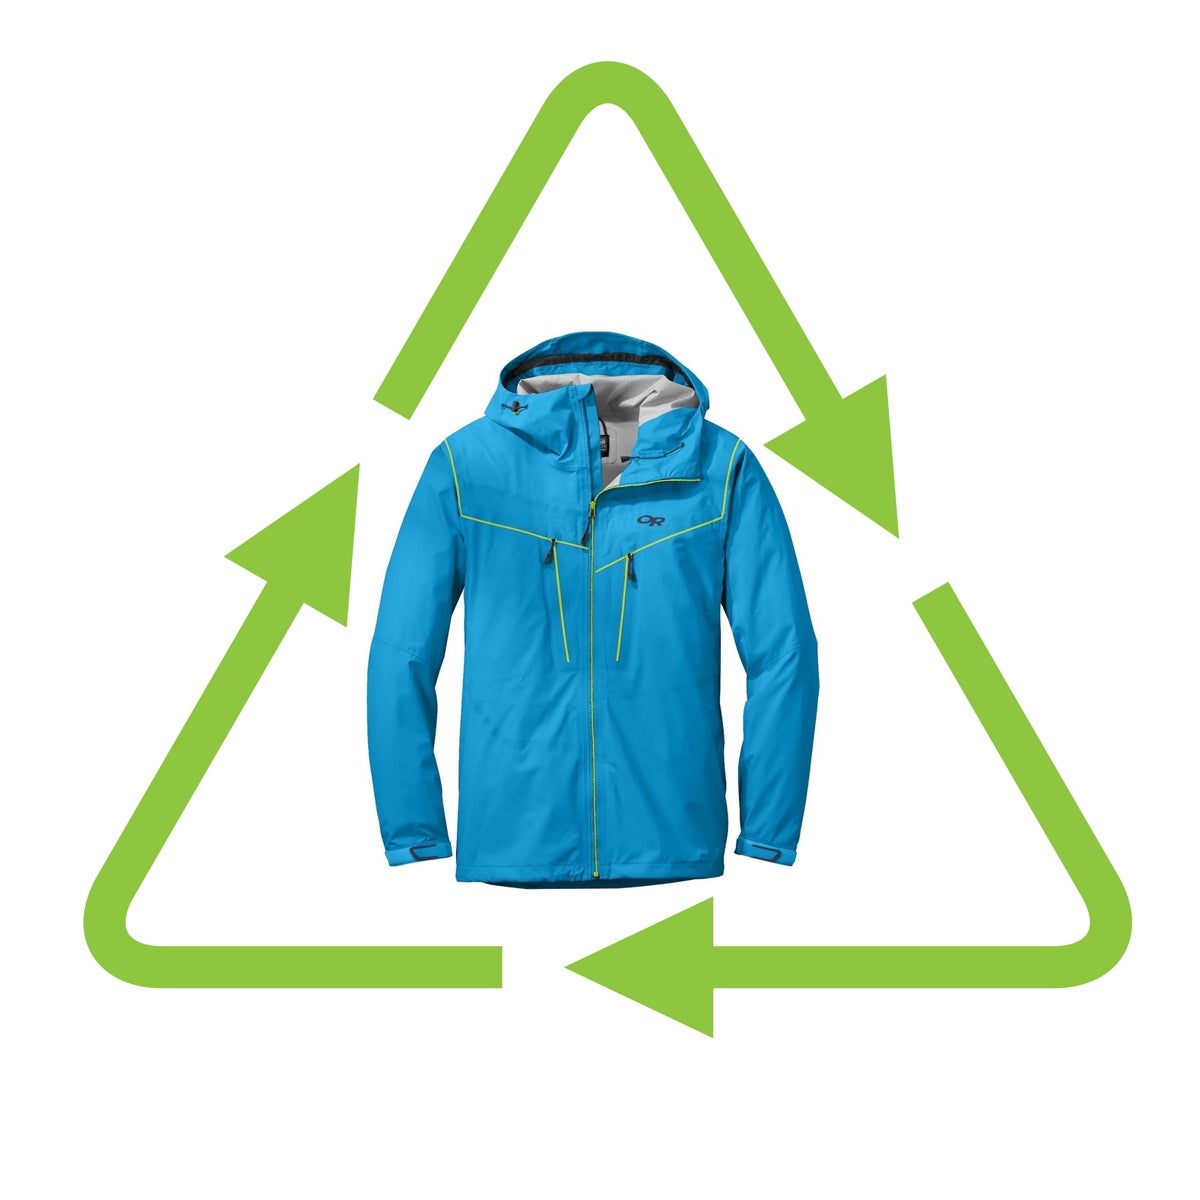 How to Clean Your Rain Jacket